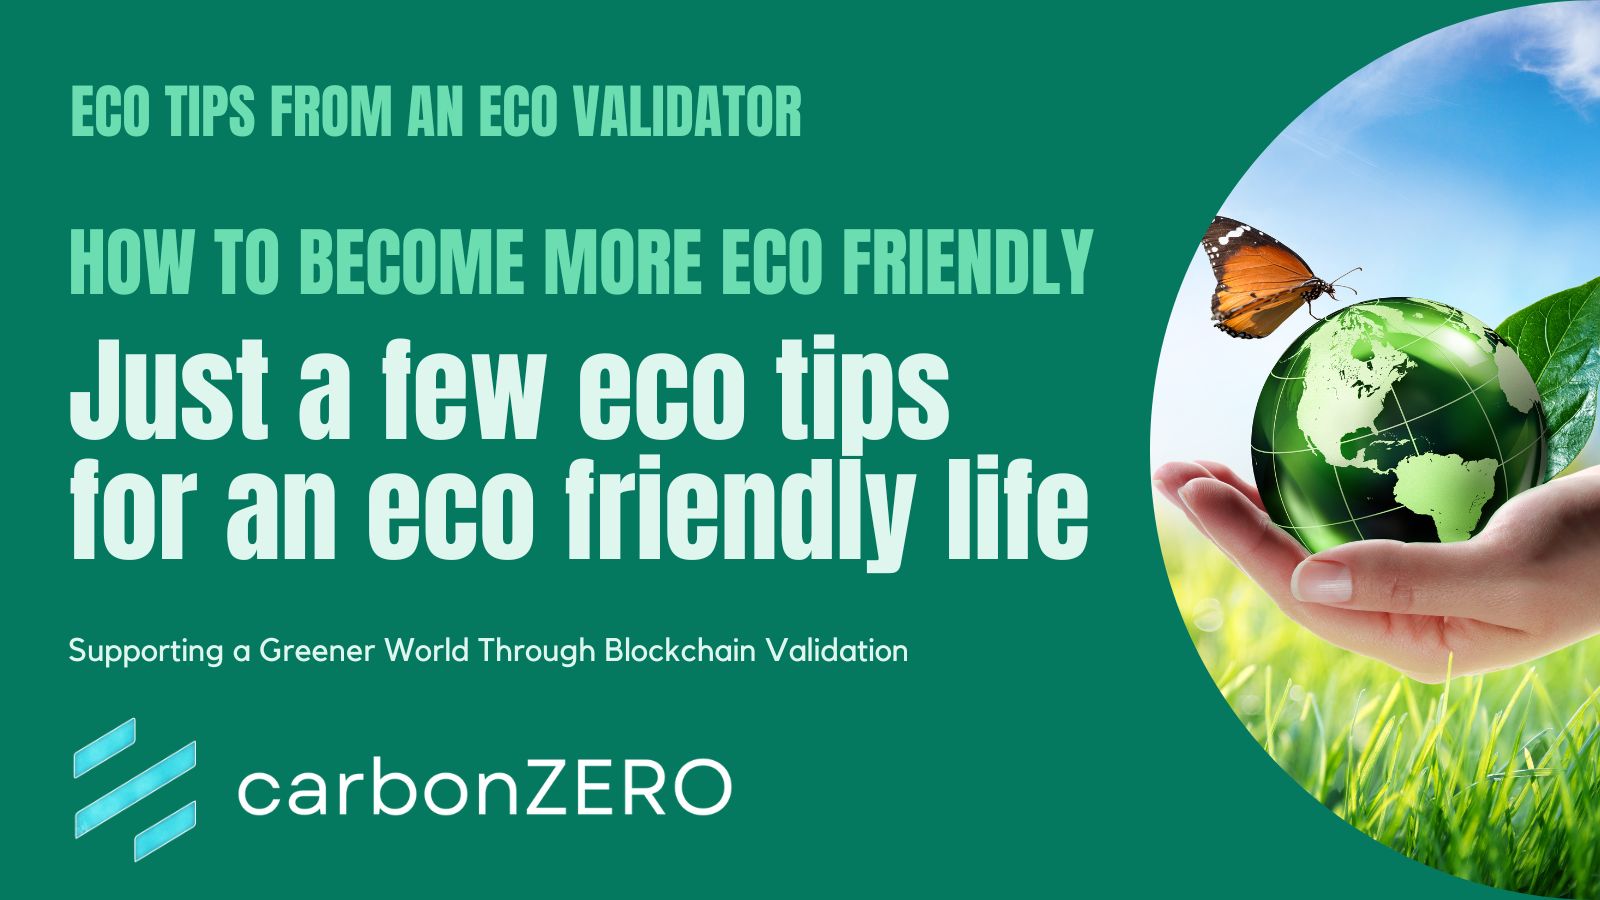 @carbonzerozone/how-to-become-more-eco-friendly-in-your-everyday-life